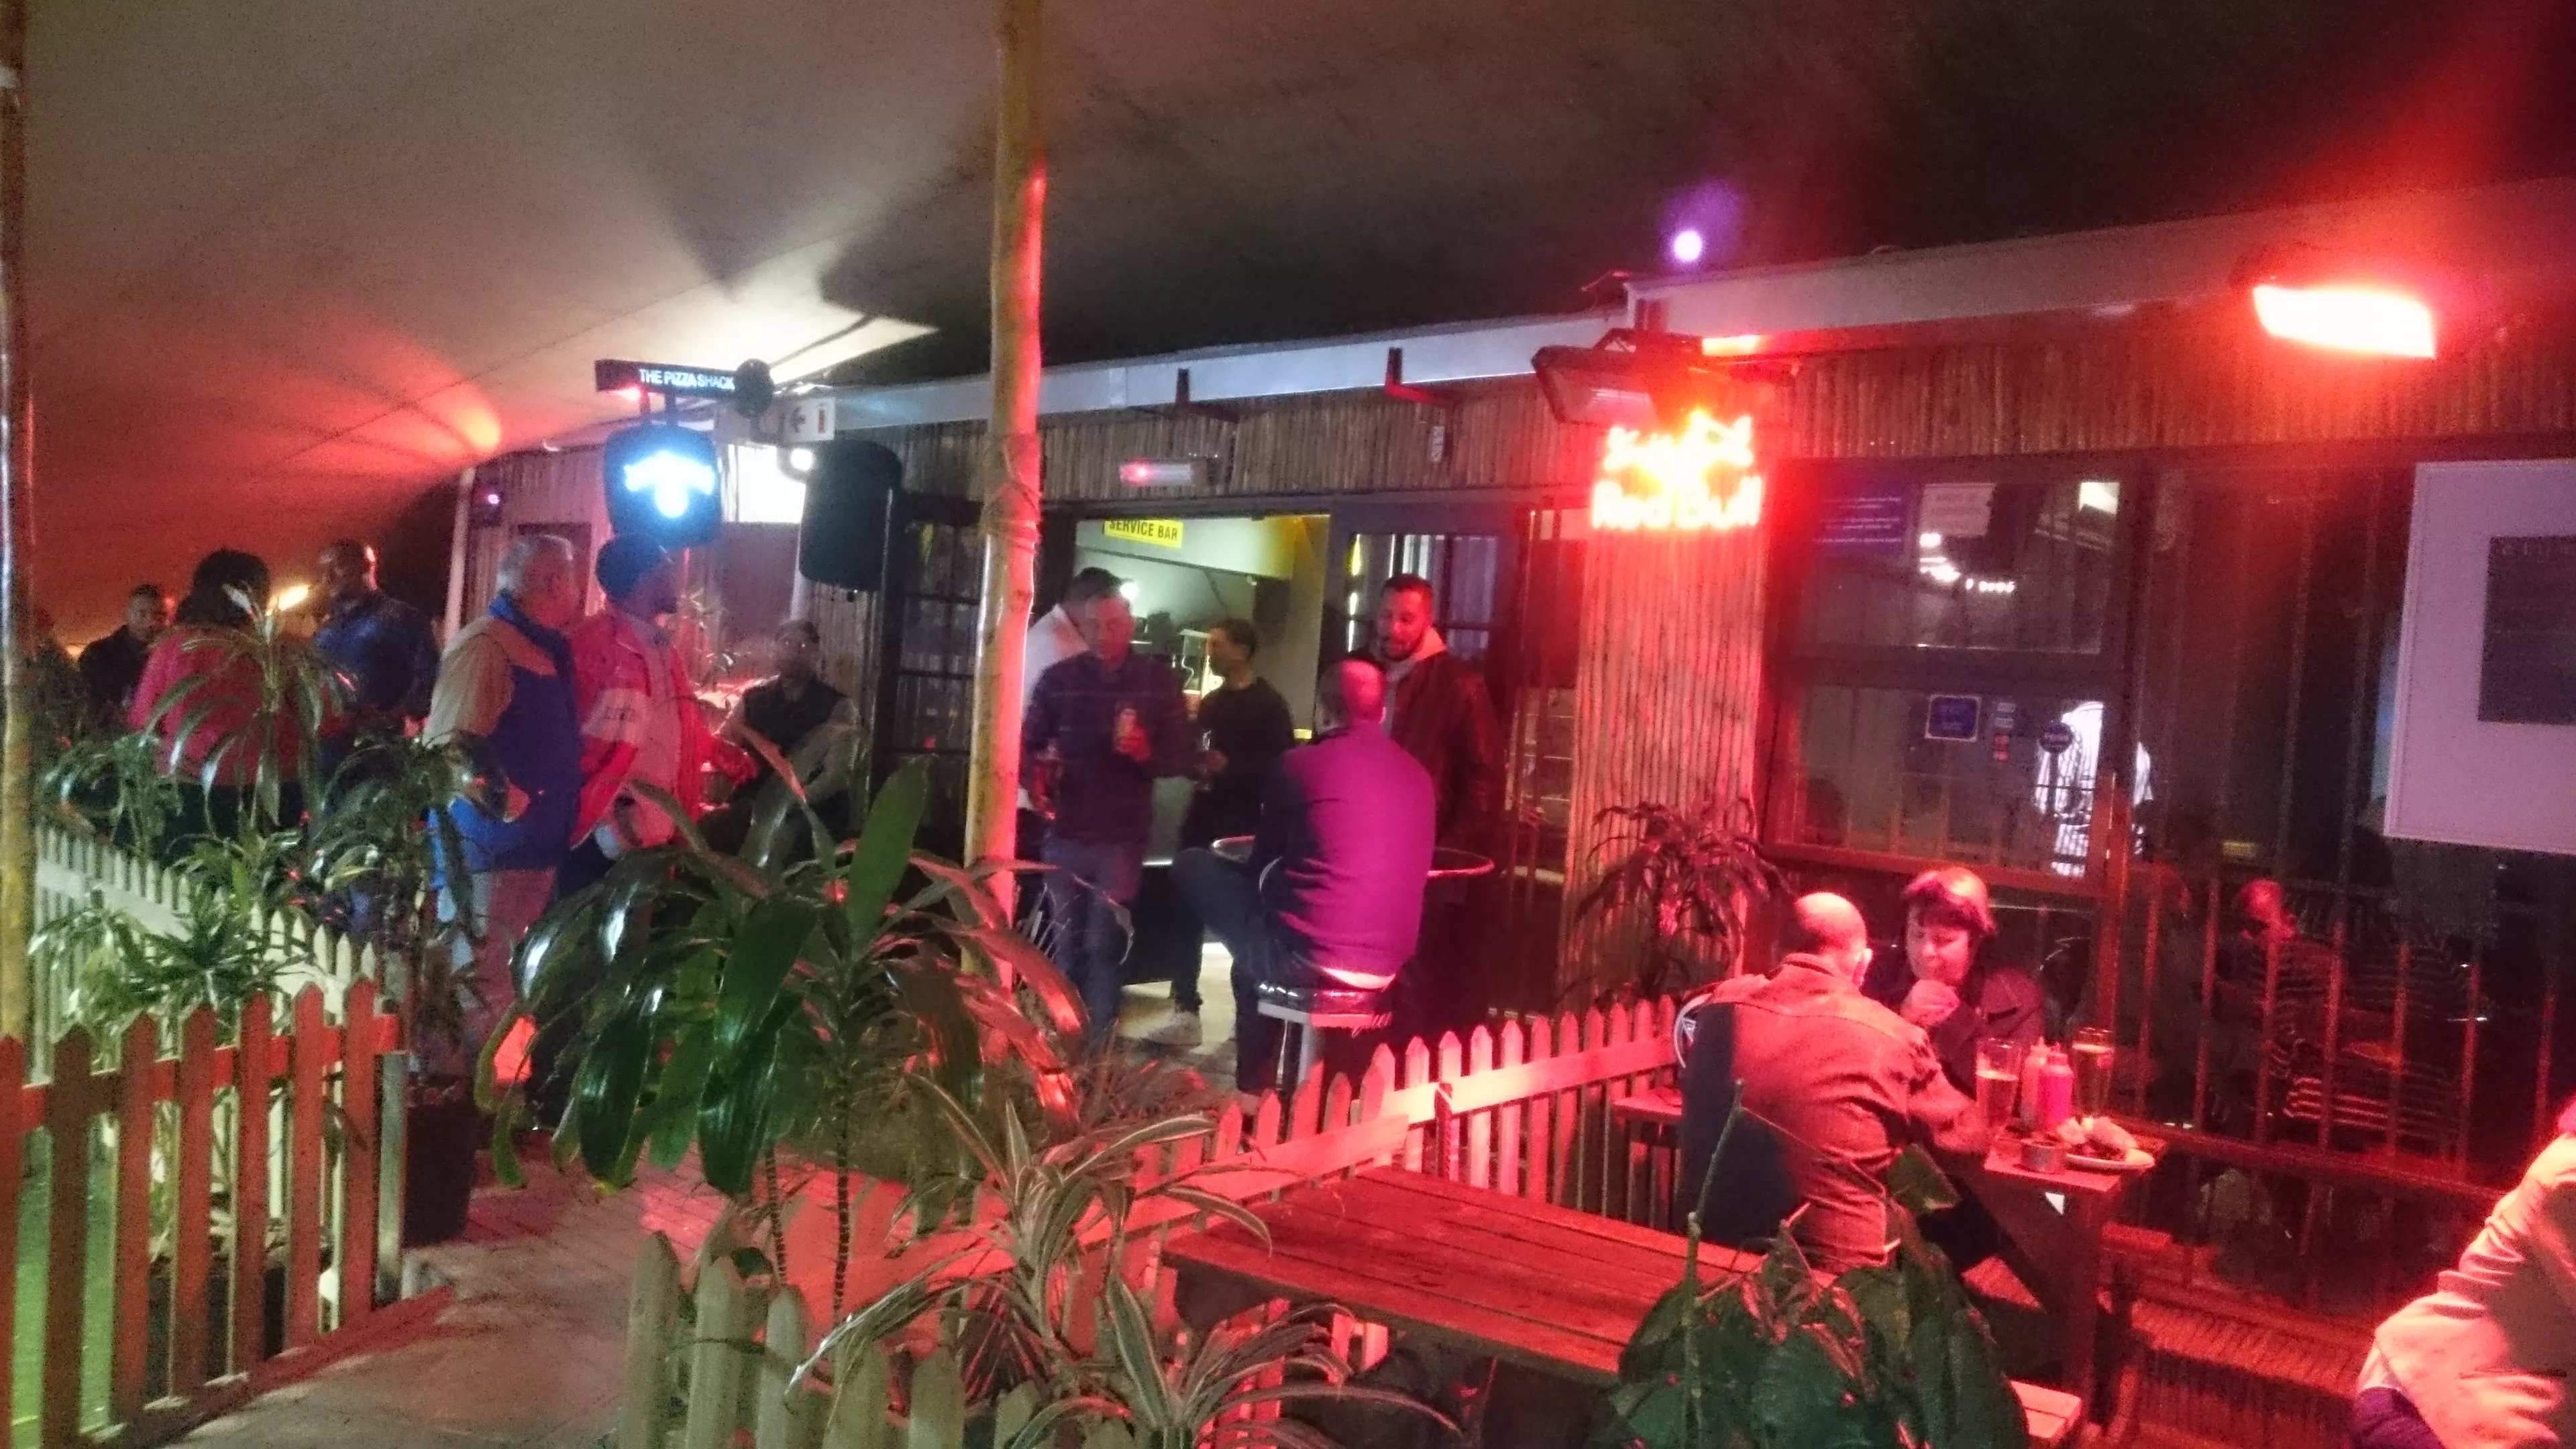 The Shack in South Africa, Africa | Bars,Billiards - Rated 3.6